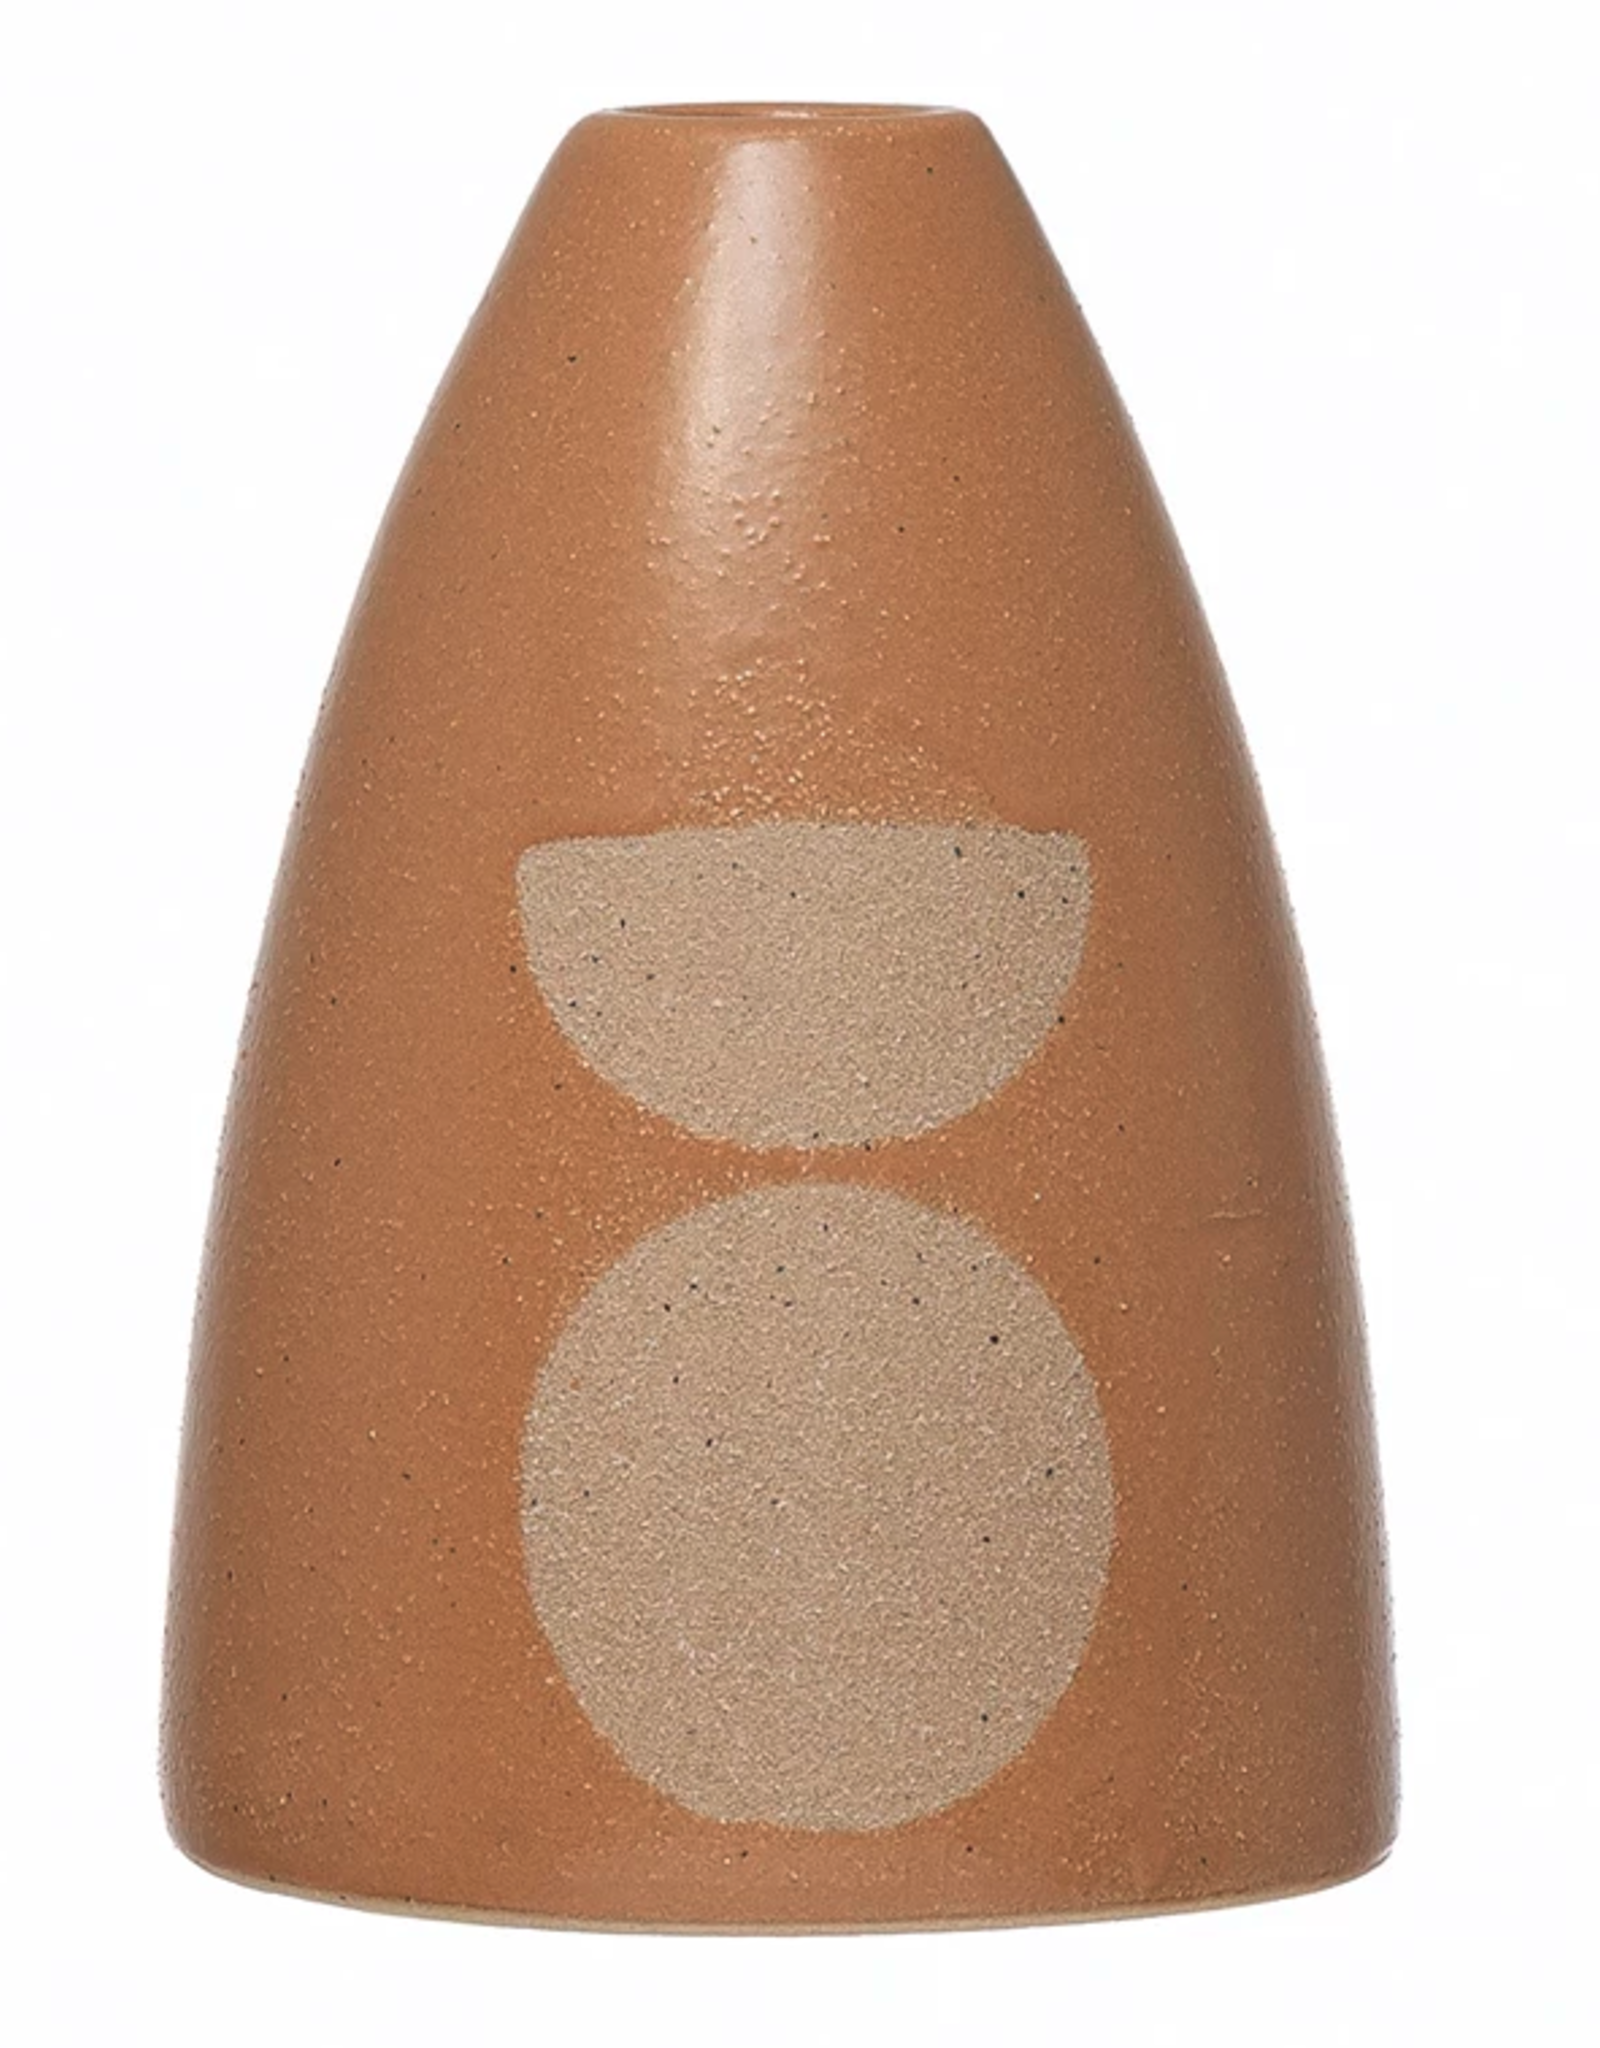 Tan Stoneware Taper Holder with Circles H5.25"